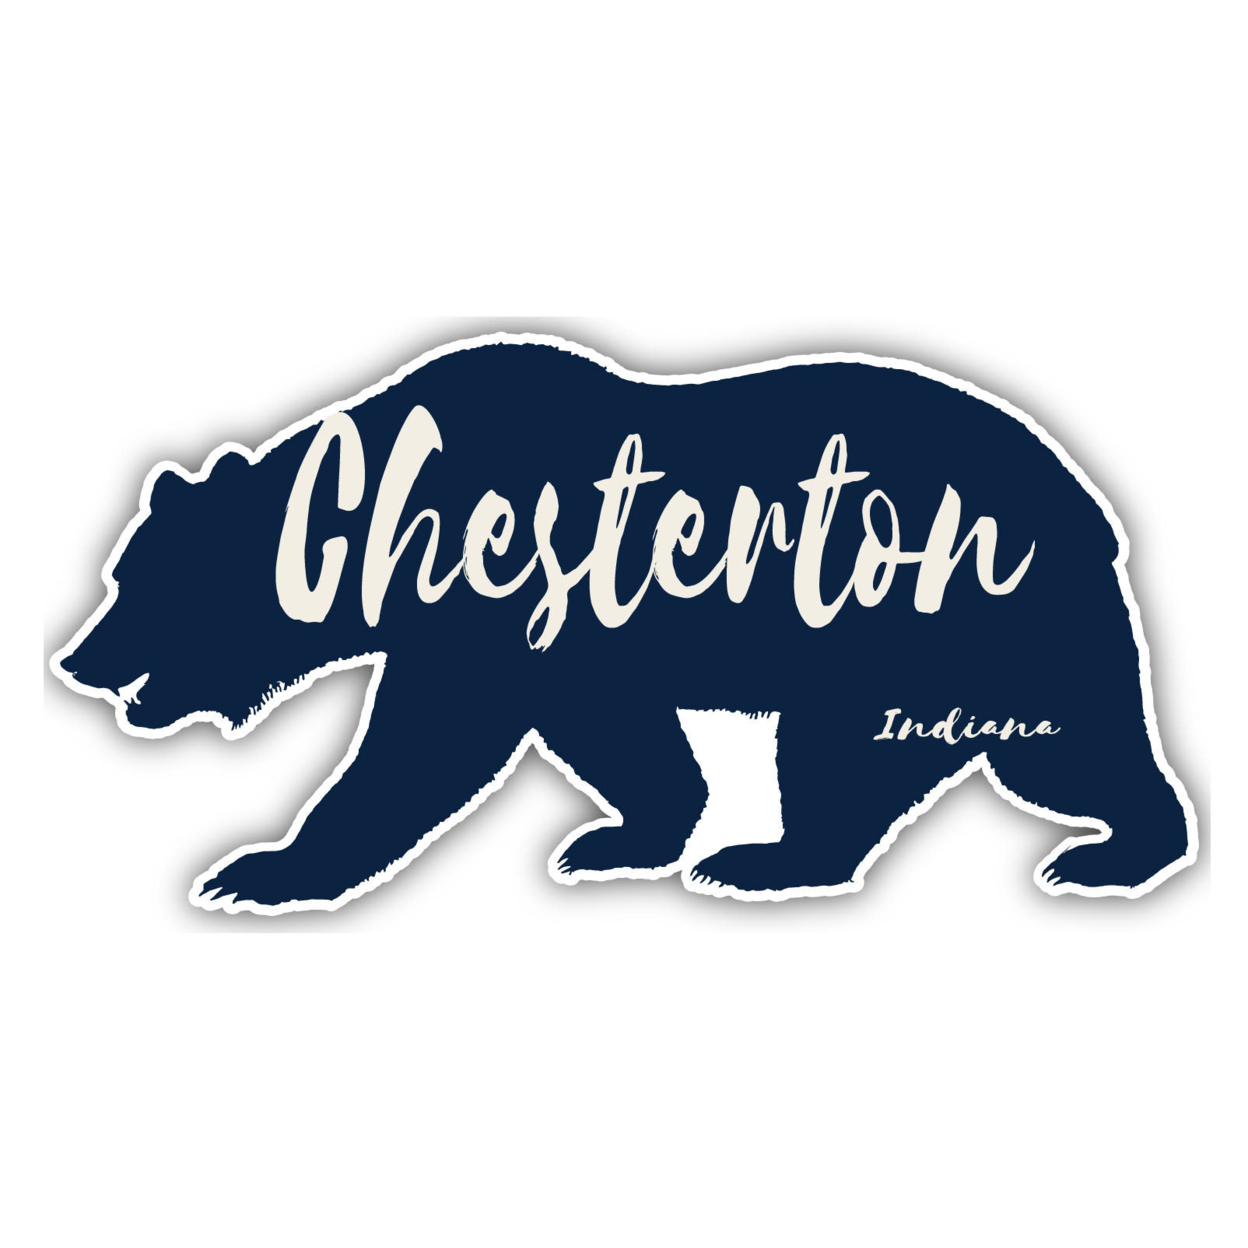 Chesterton Indiana Souvenir Decorative Stickers (Choose Theme And Size) - 4-Pack, 6-Inch, Bear